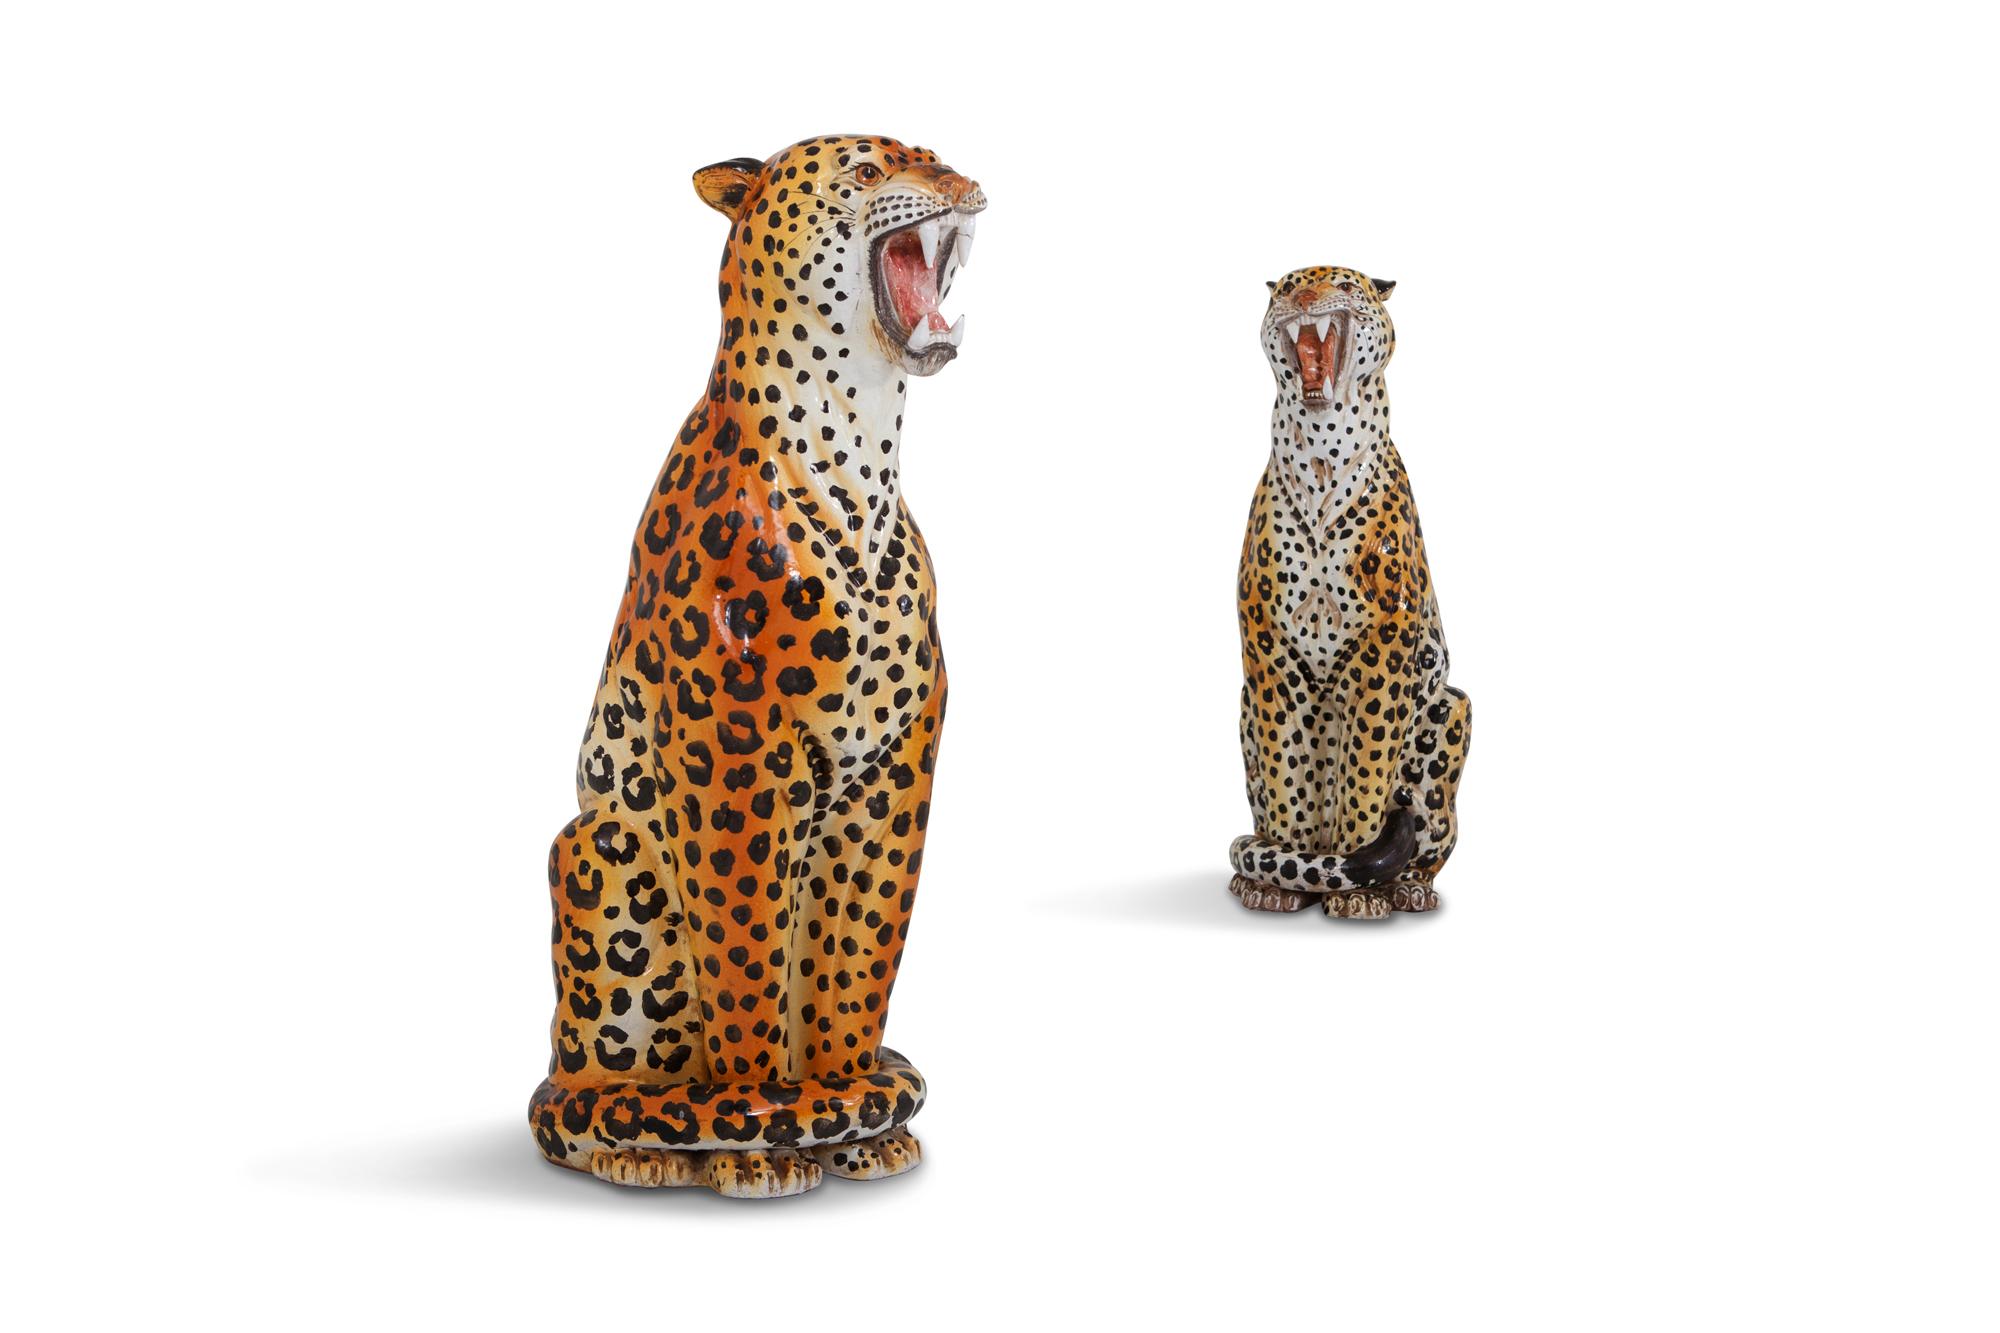 Hollywood Regency Leopard Ceramic Hand-Painted Sculptures from Italy, 1950s